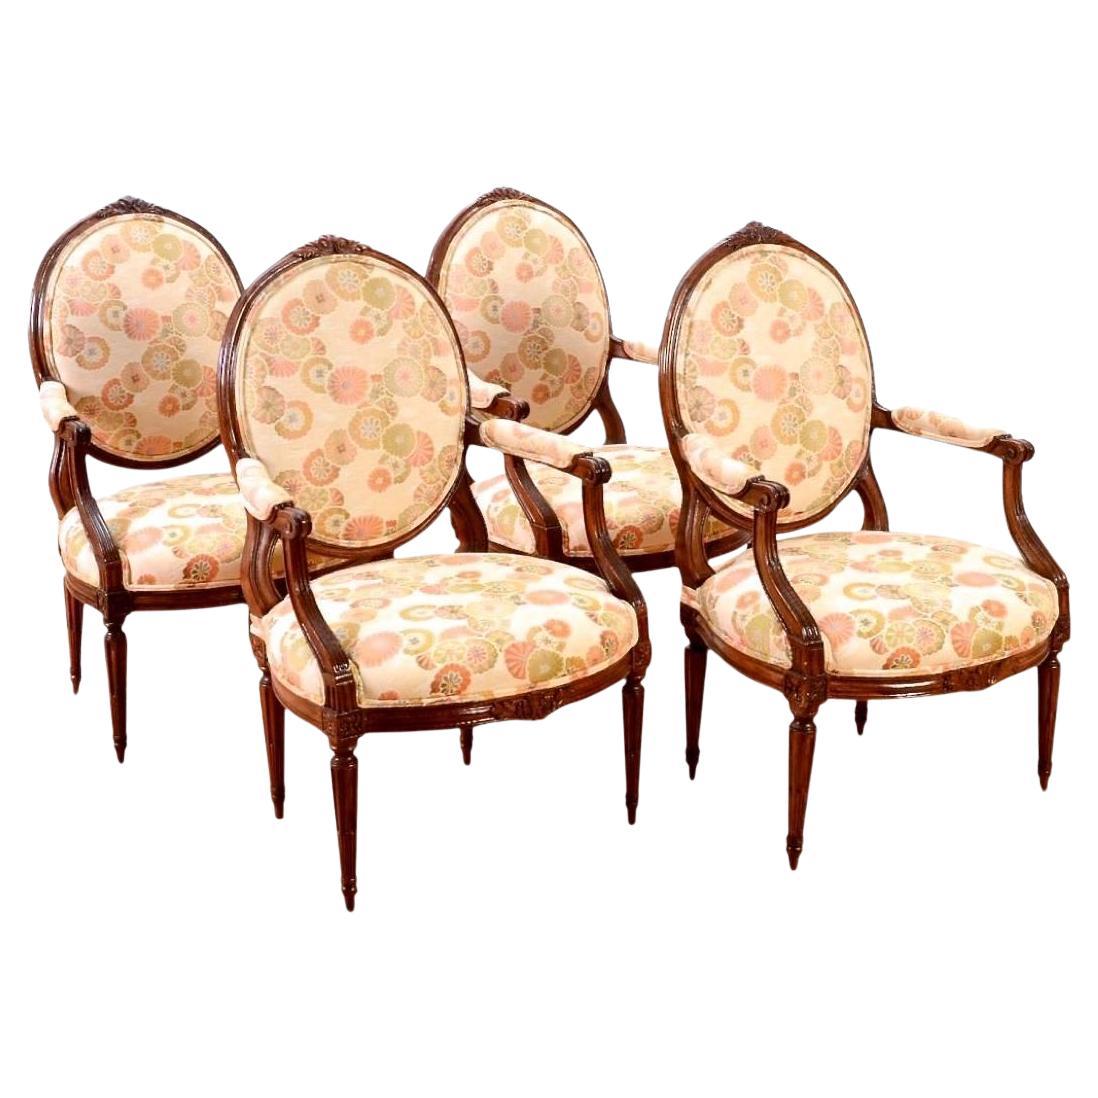 Set Of Four Louis XVI Style Carved Beechwood Fauteuils, 19th Century